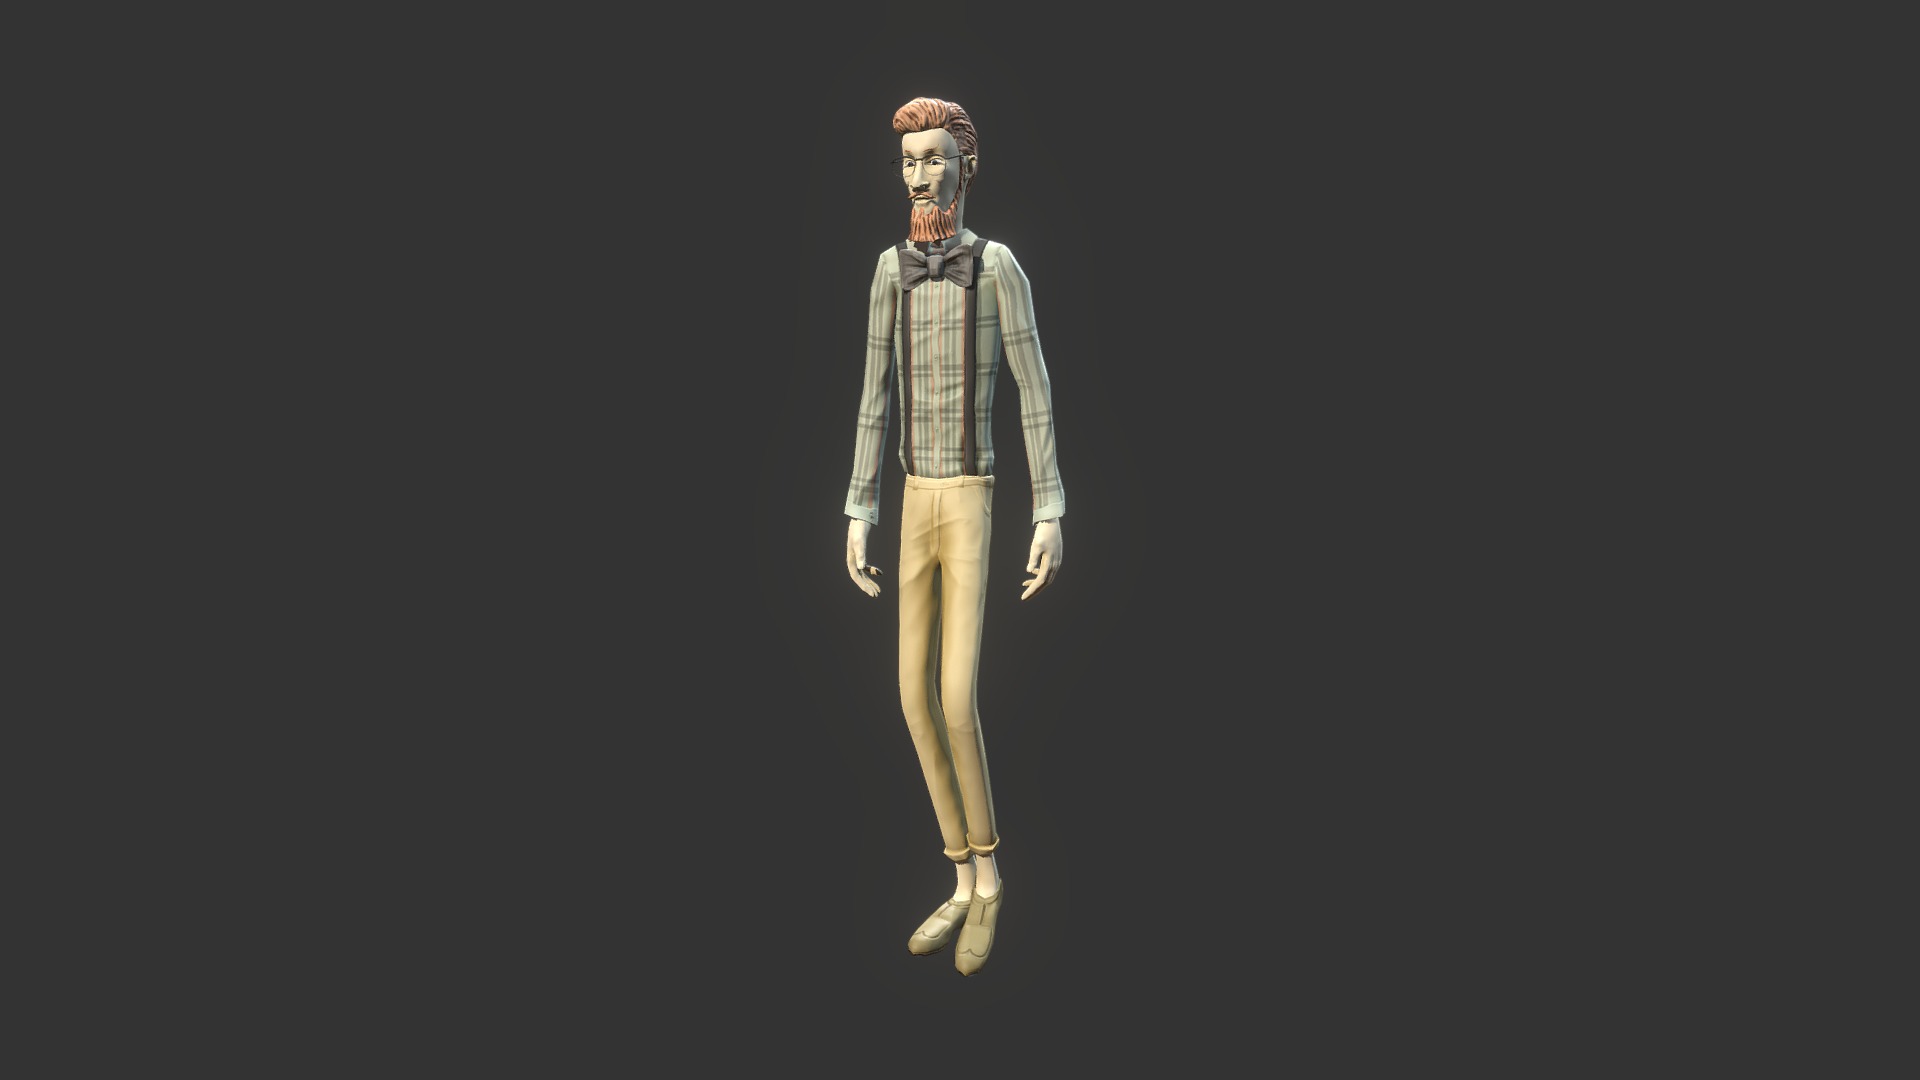 3D model Tall Guy - This is a 3D model of the Tall Guy. The 3D model is about a person wearing a white shirt and white shoes.